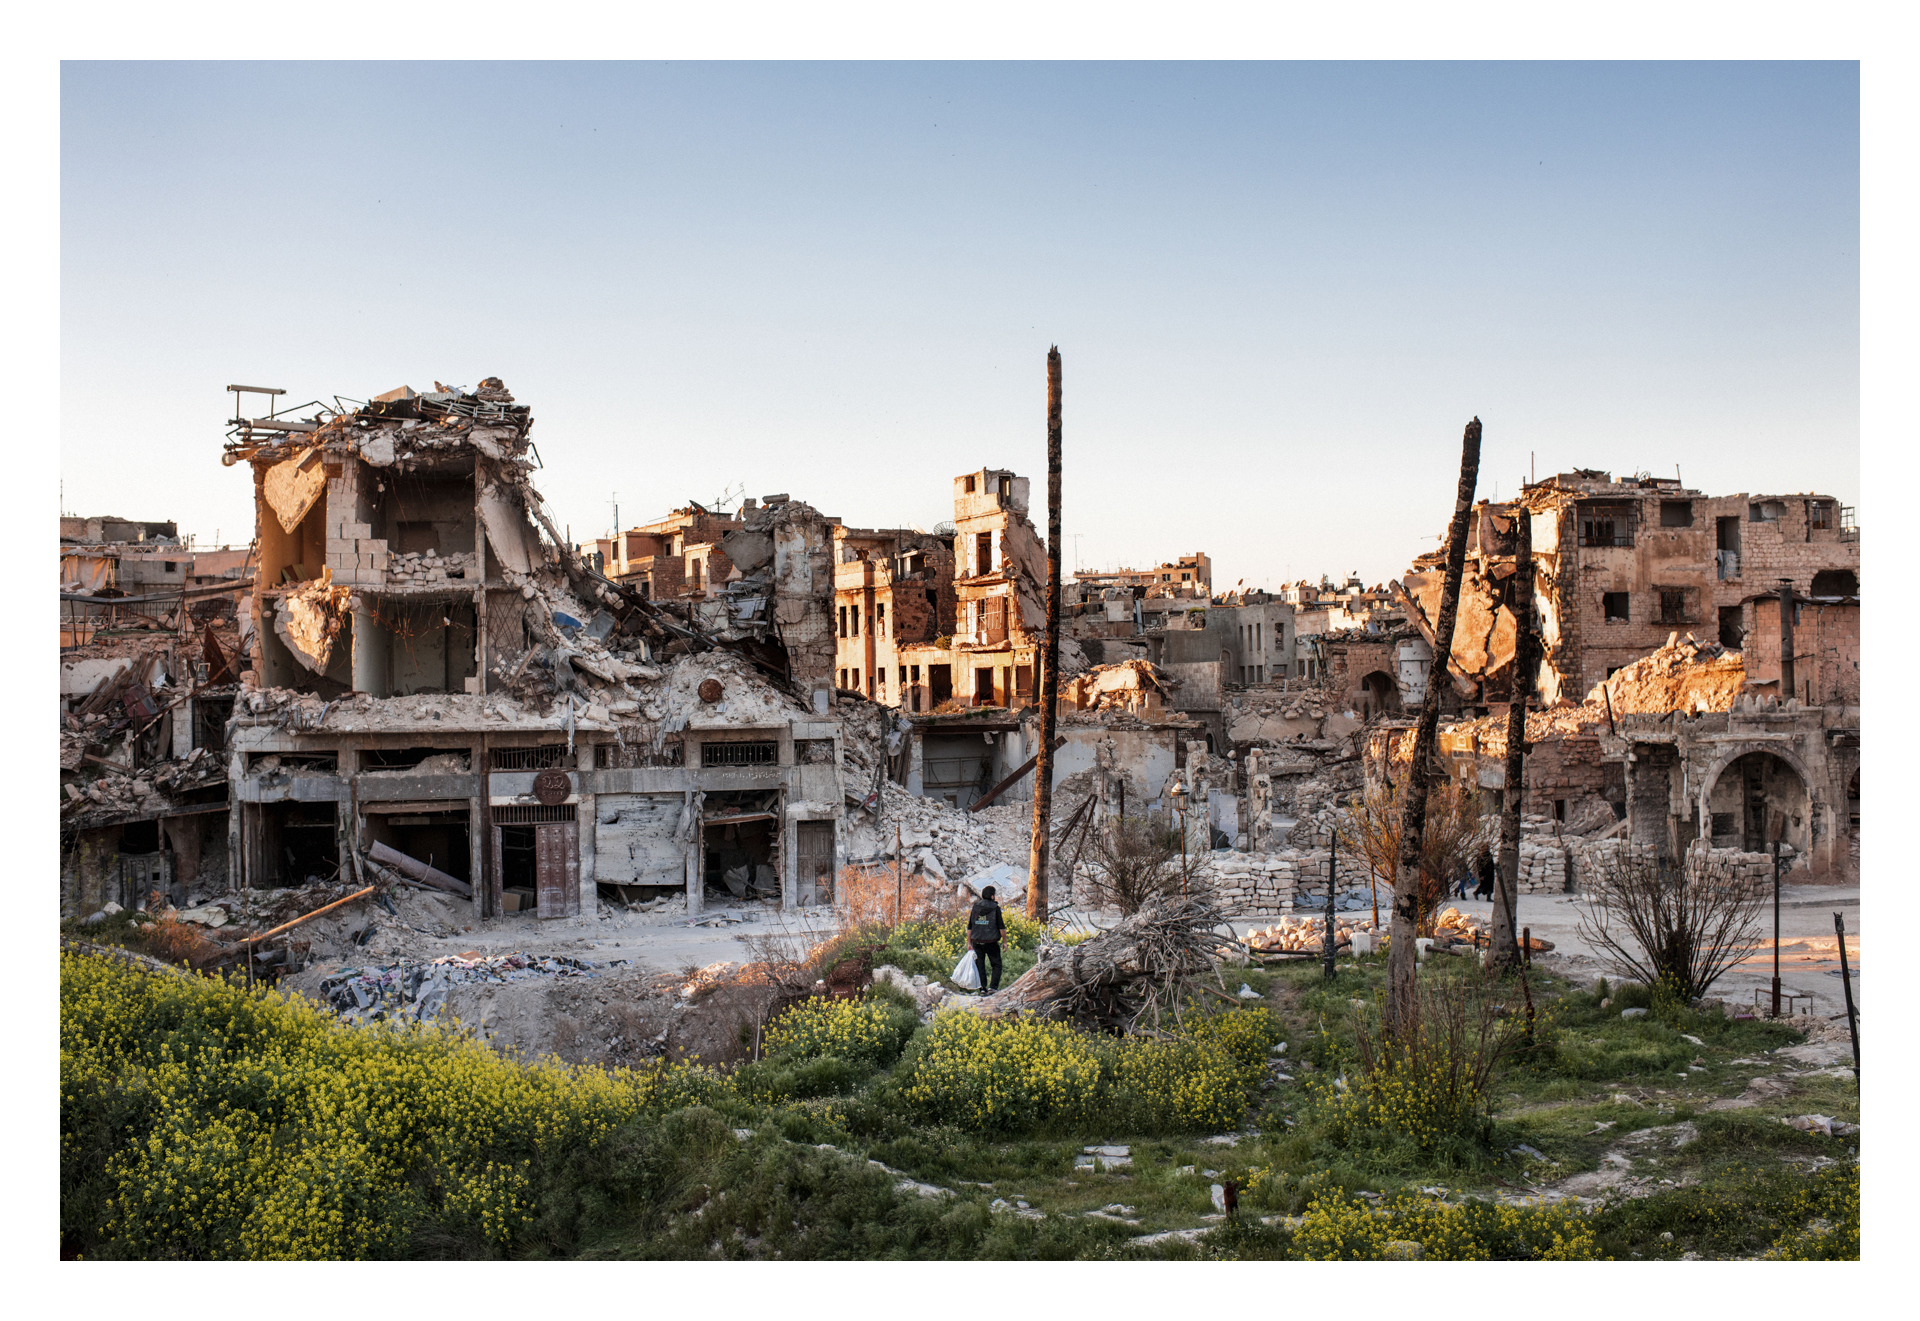  Syria, Aleppo, 25 March 2017

Al-Hatab Square is one of the oldest squares in the Syrian city of Aleppo. It is located in the old Jdeydeh Quarter, outside the historic walls of the Ancient City of Aleppo. The square has suffered catastrophic damage 